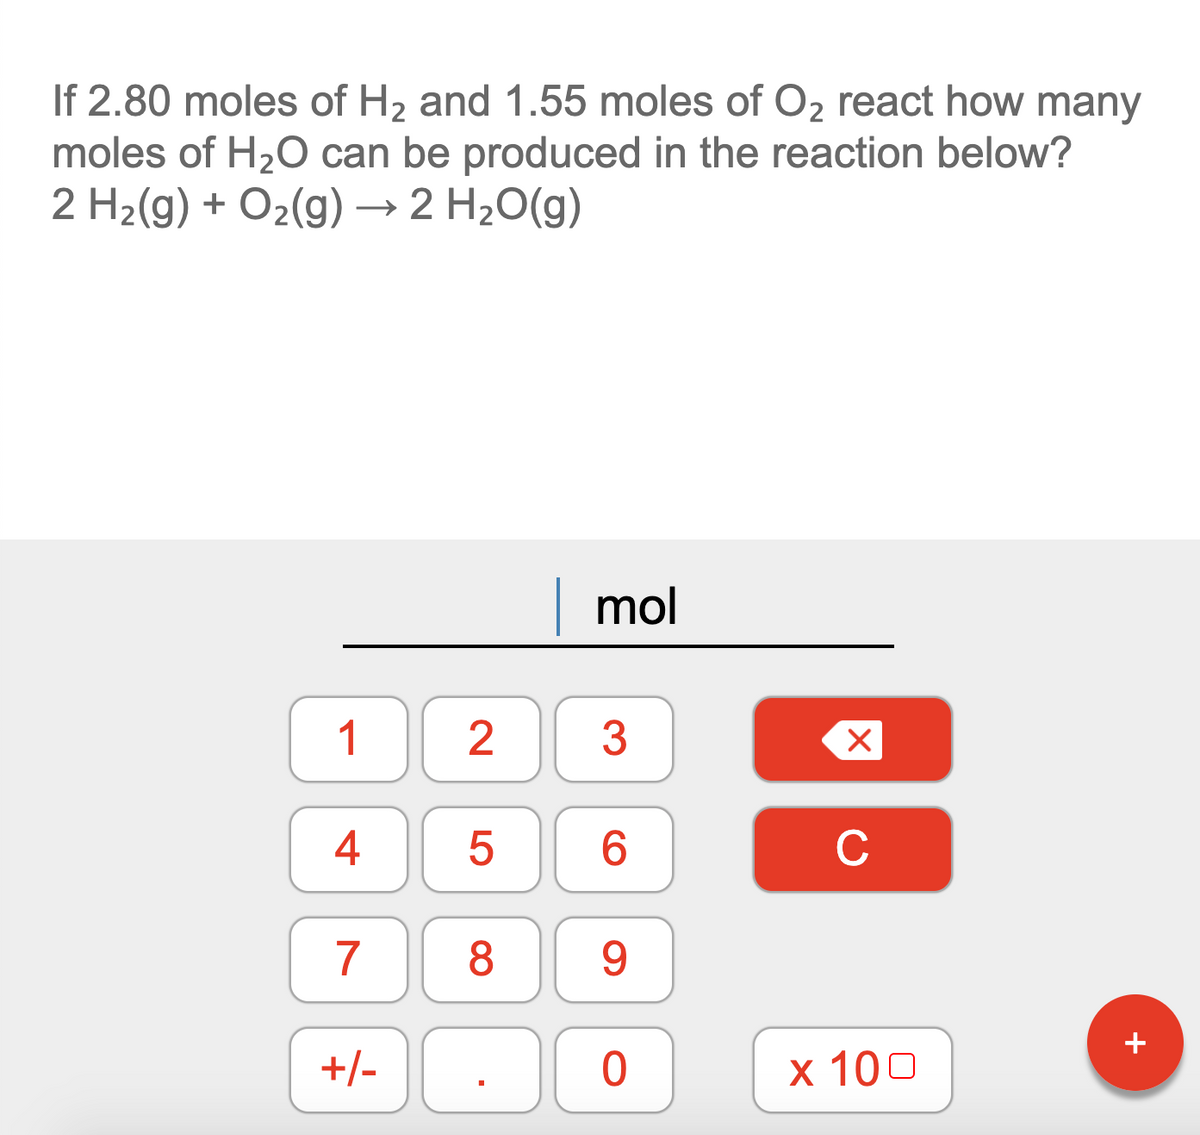 If 2.80 moles of H2 and 1.55 moles of O2 react how many
moles of H20 can be produced in the reaction below?
2 H2(g) + O2(g) → 2 H2O(g)
| mol
1
4
6.
C
7
8
9.
+/-
х 100
LO
